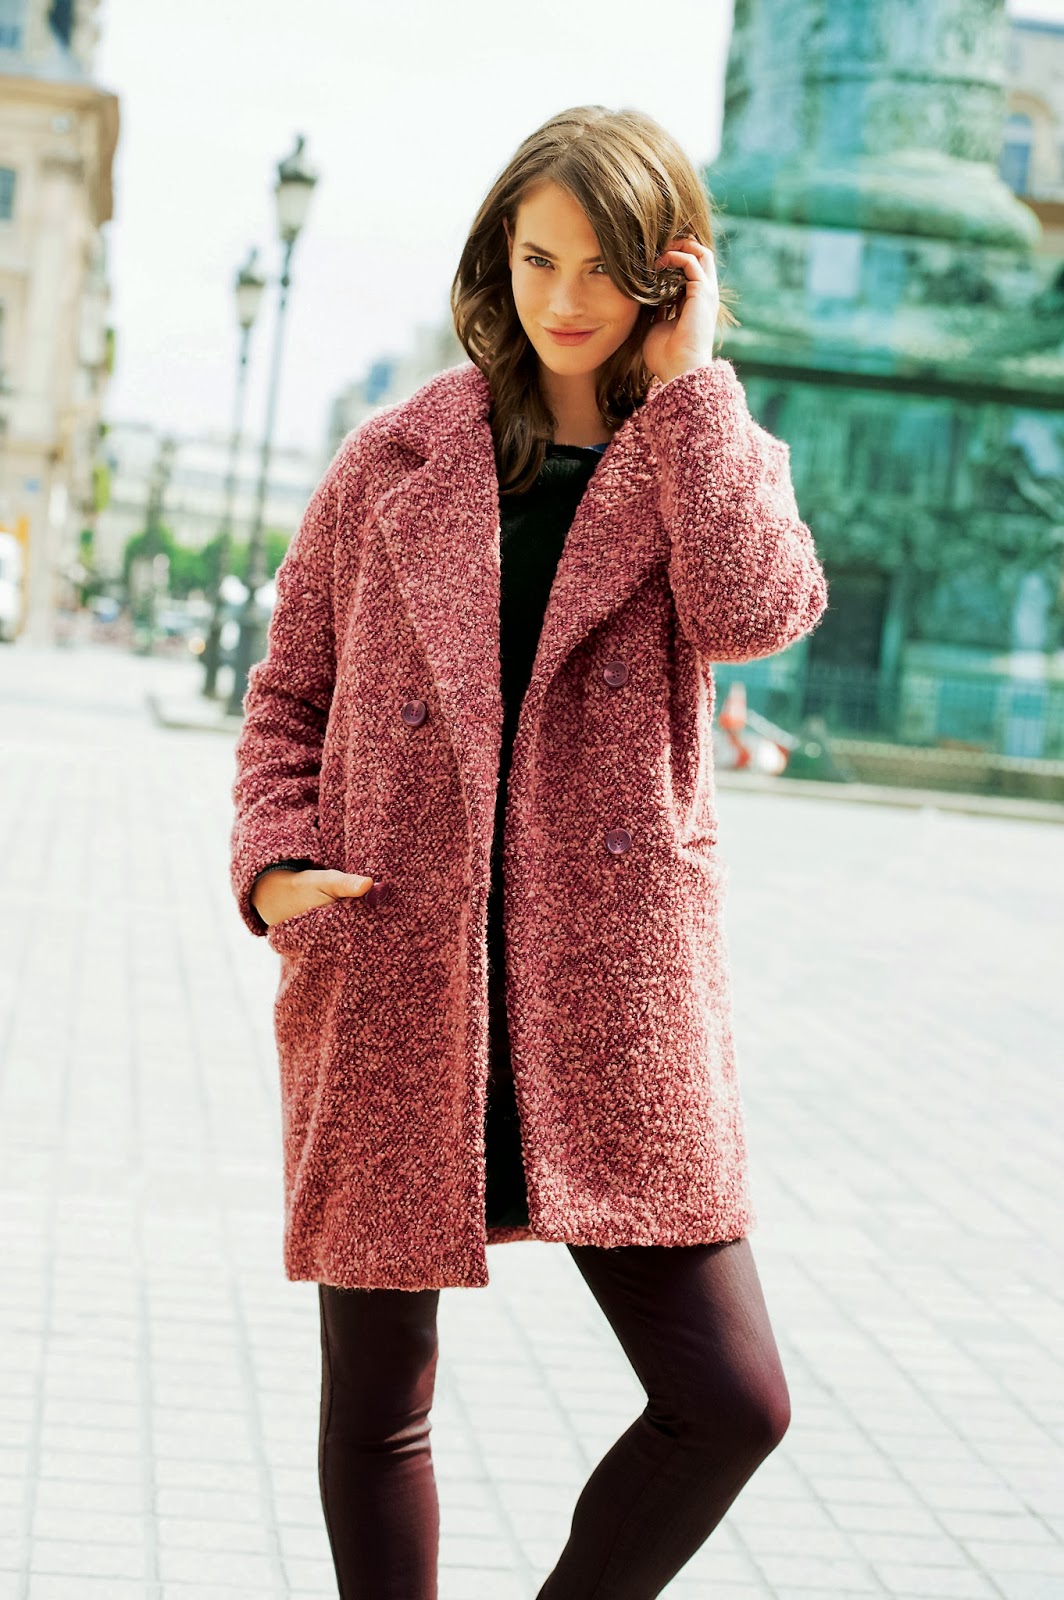 frumpy to funky: Tickled Pink in a new Winter Coat